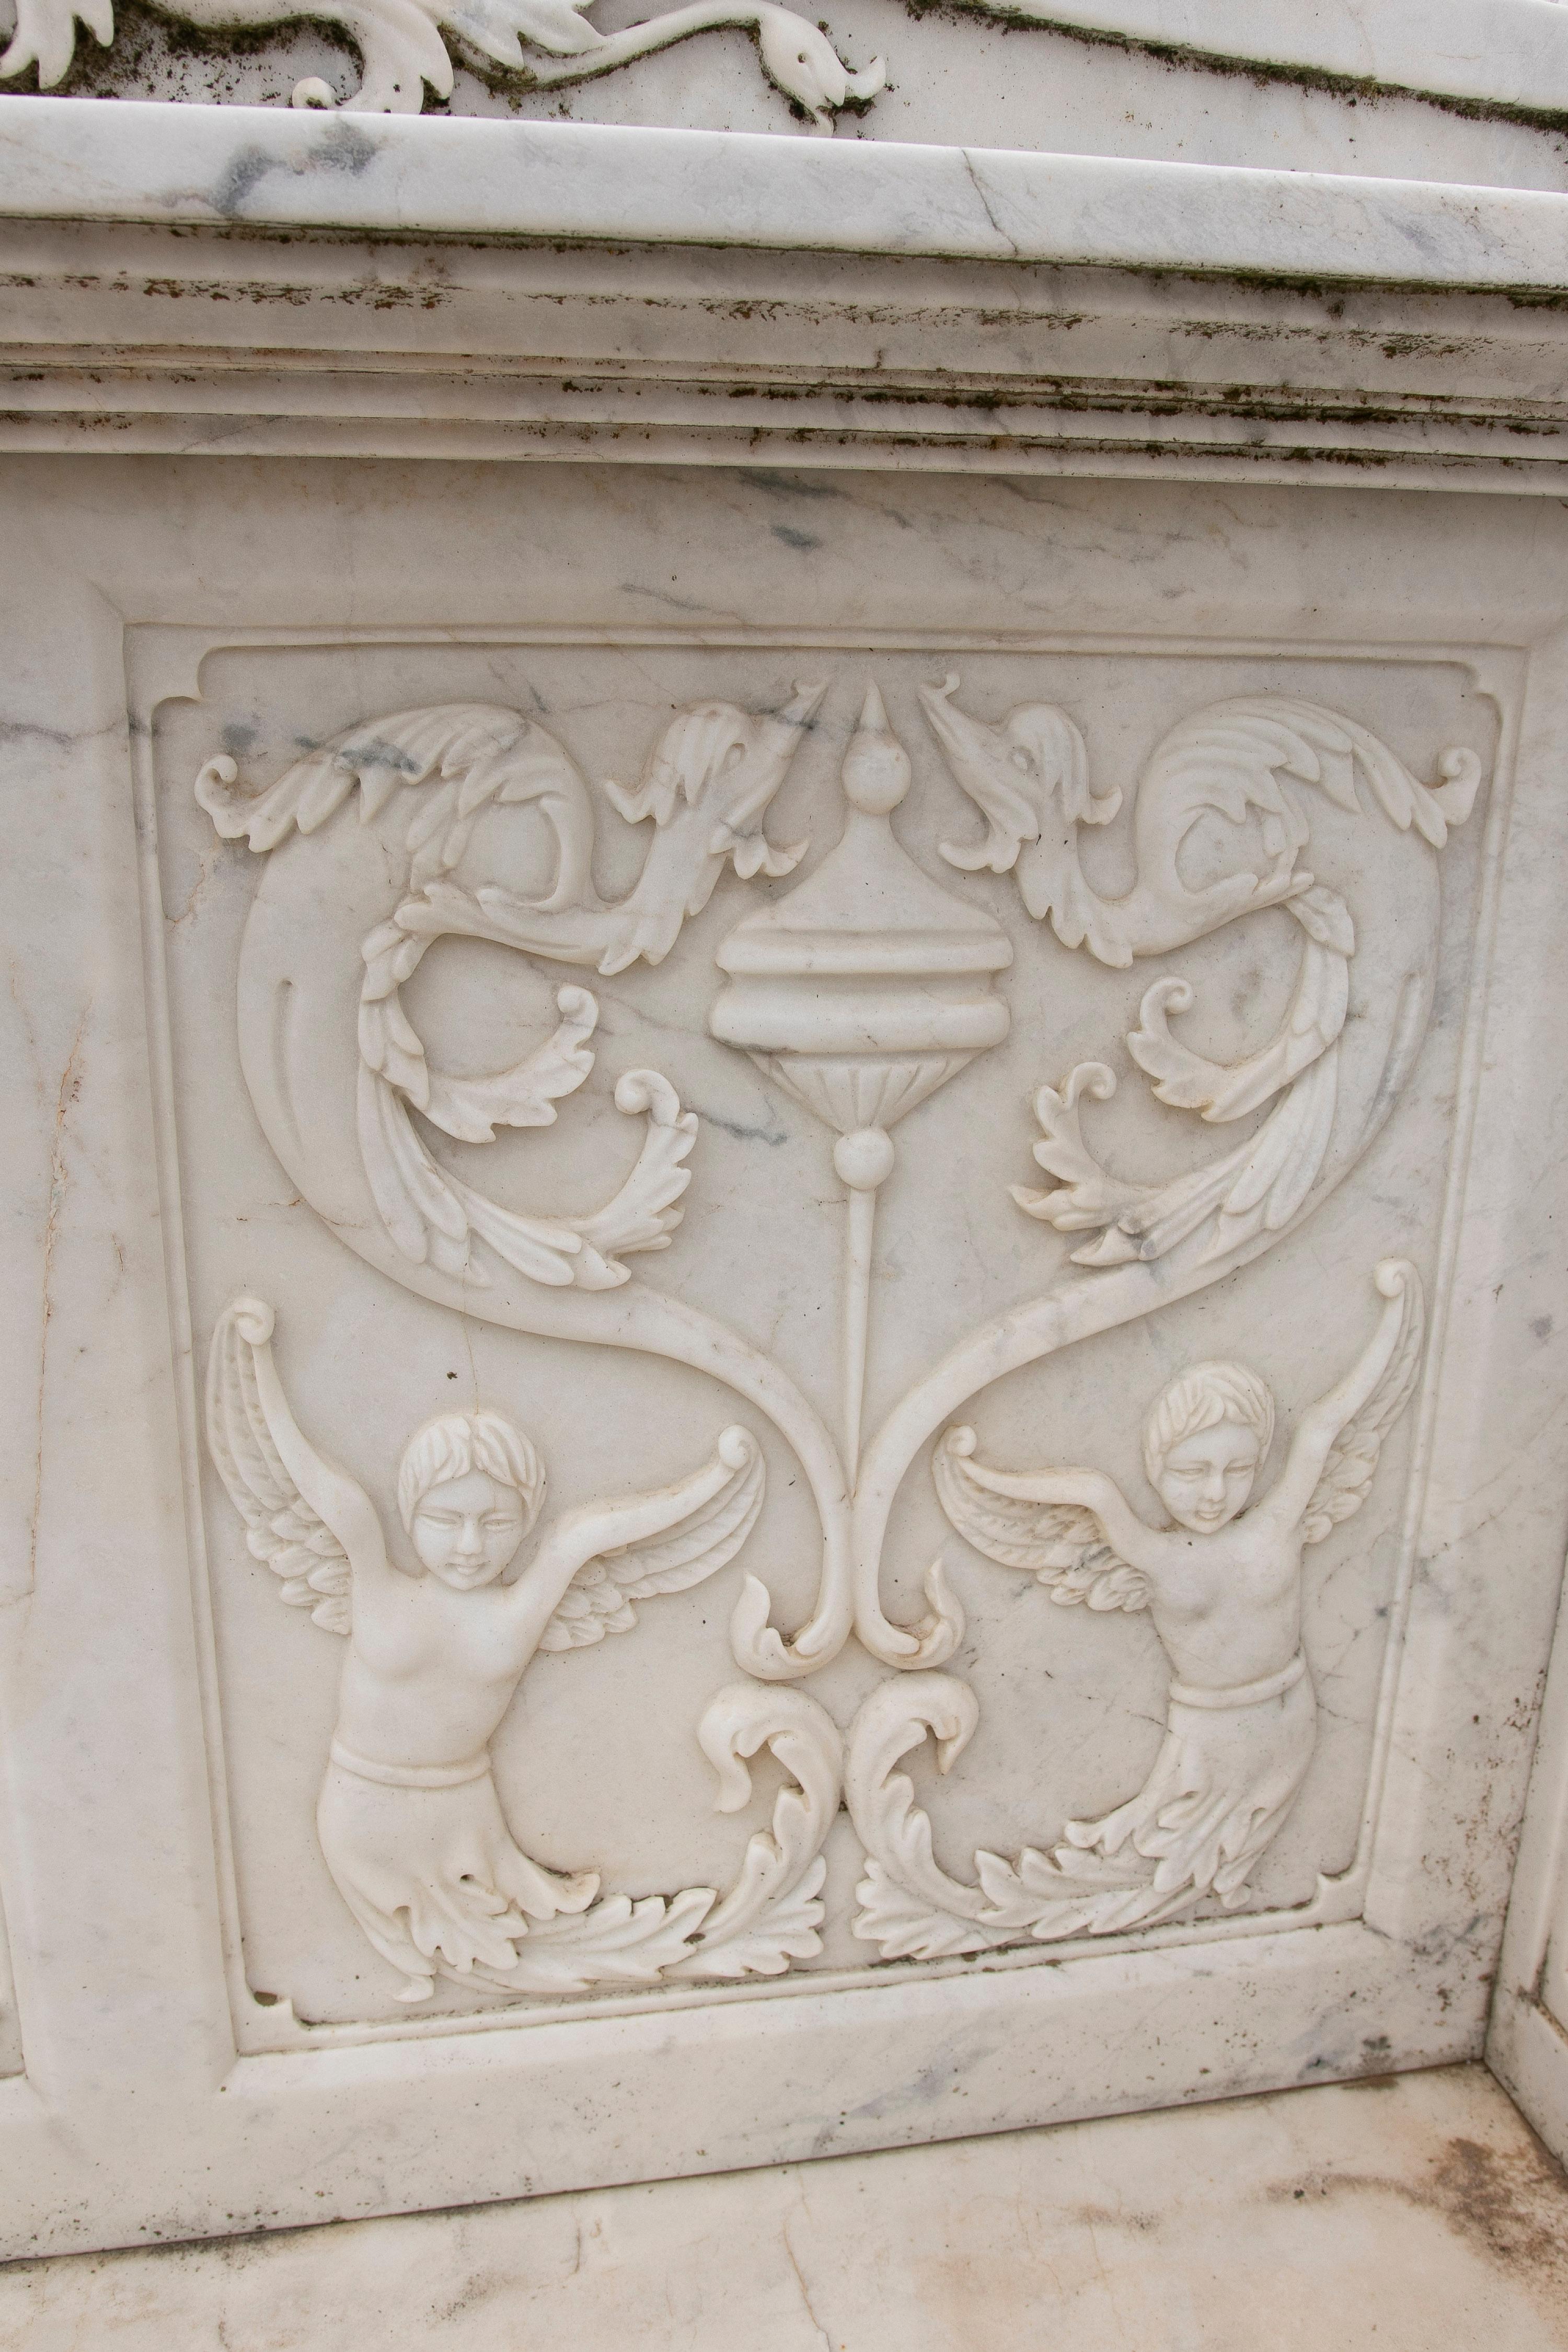 1990s Spanish hand carved Carrara white marble 2-seater garden bench in Italian Renaissance style, with ornate cherubs and plant relief decorations.